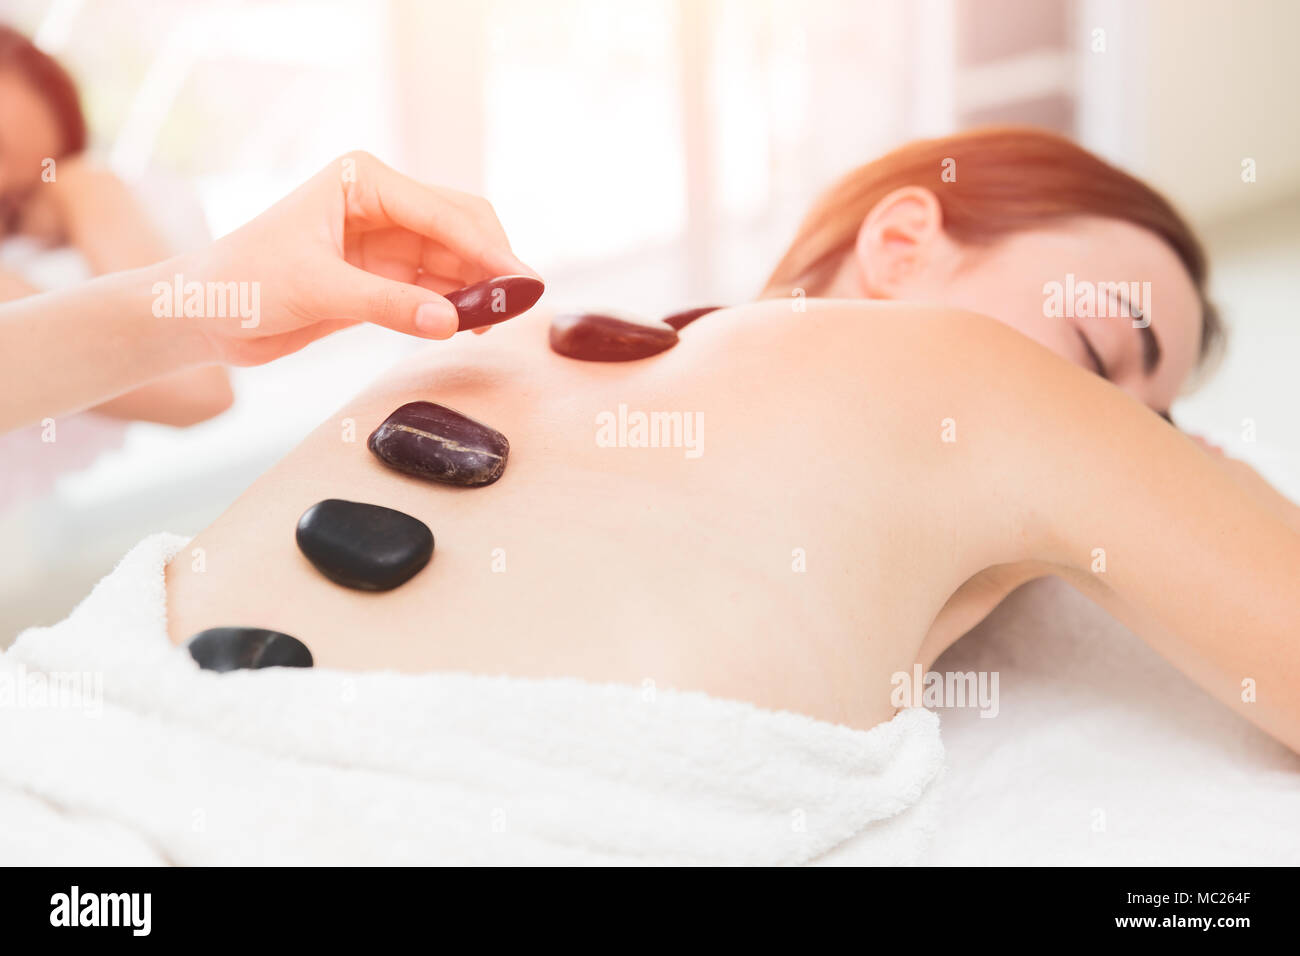 Hot and Cold Stones Massage in Spa for Back Pain Relief and Relaxation Stock Photo